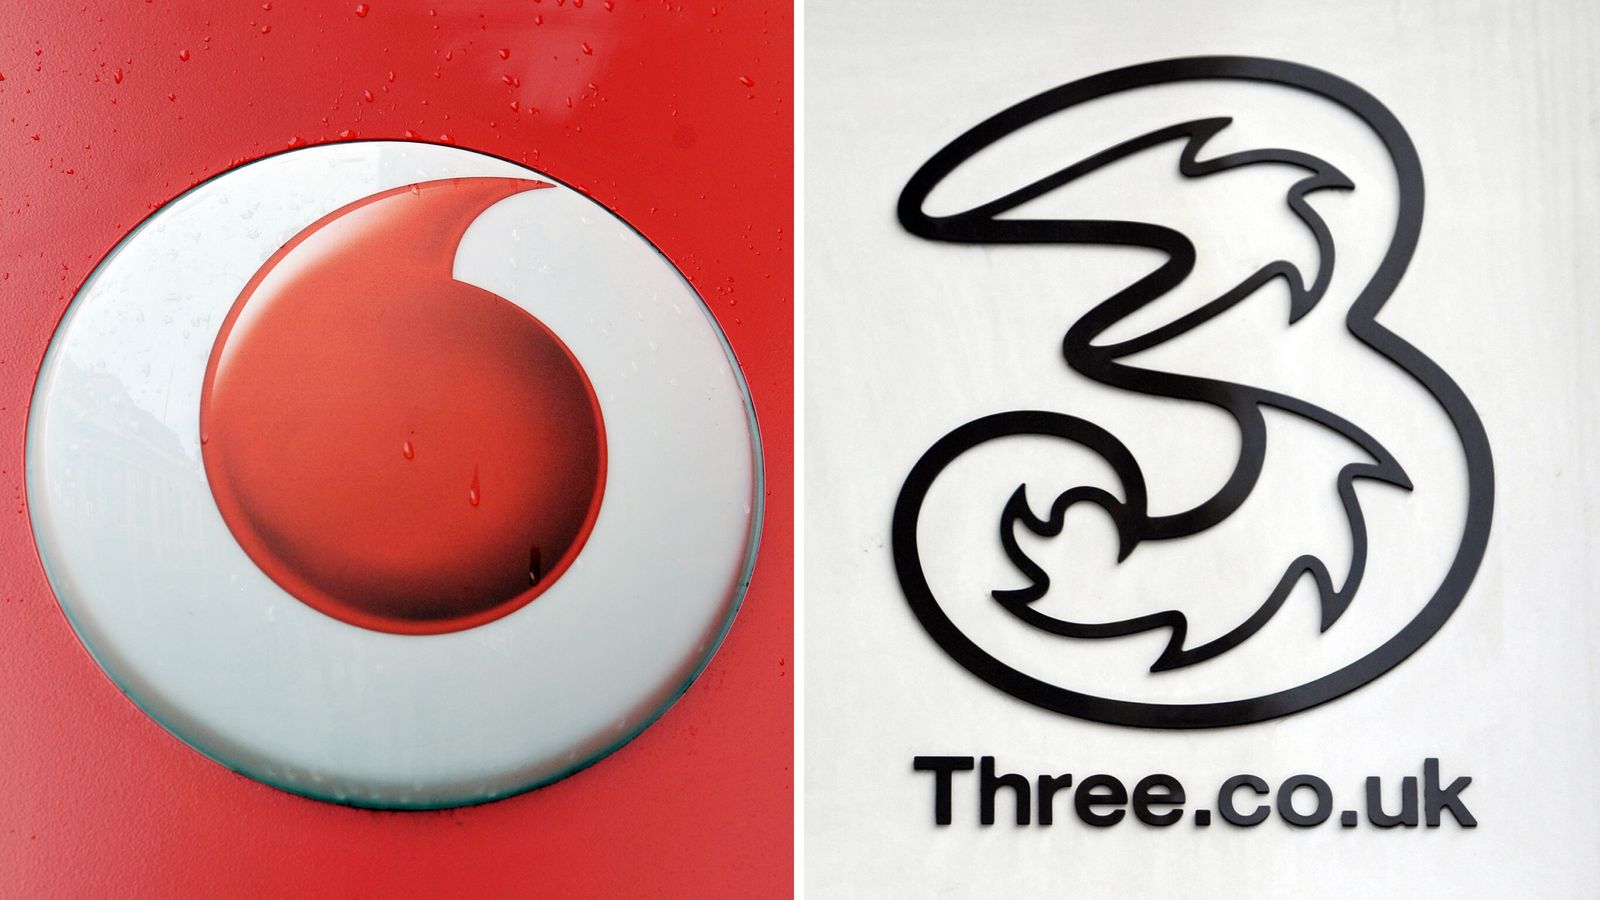 Vodafone and Three agree UK merger to create biggest mobile player worth £15bn